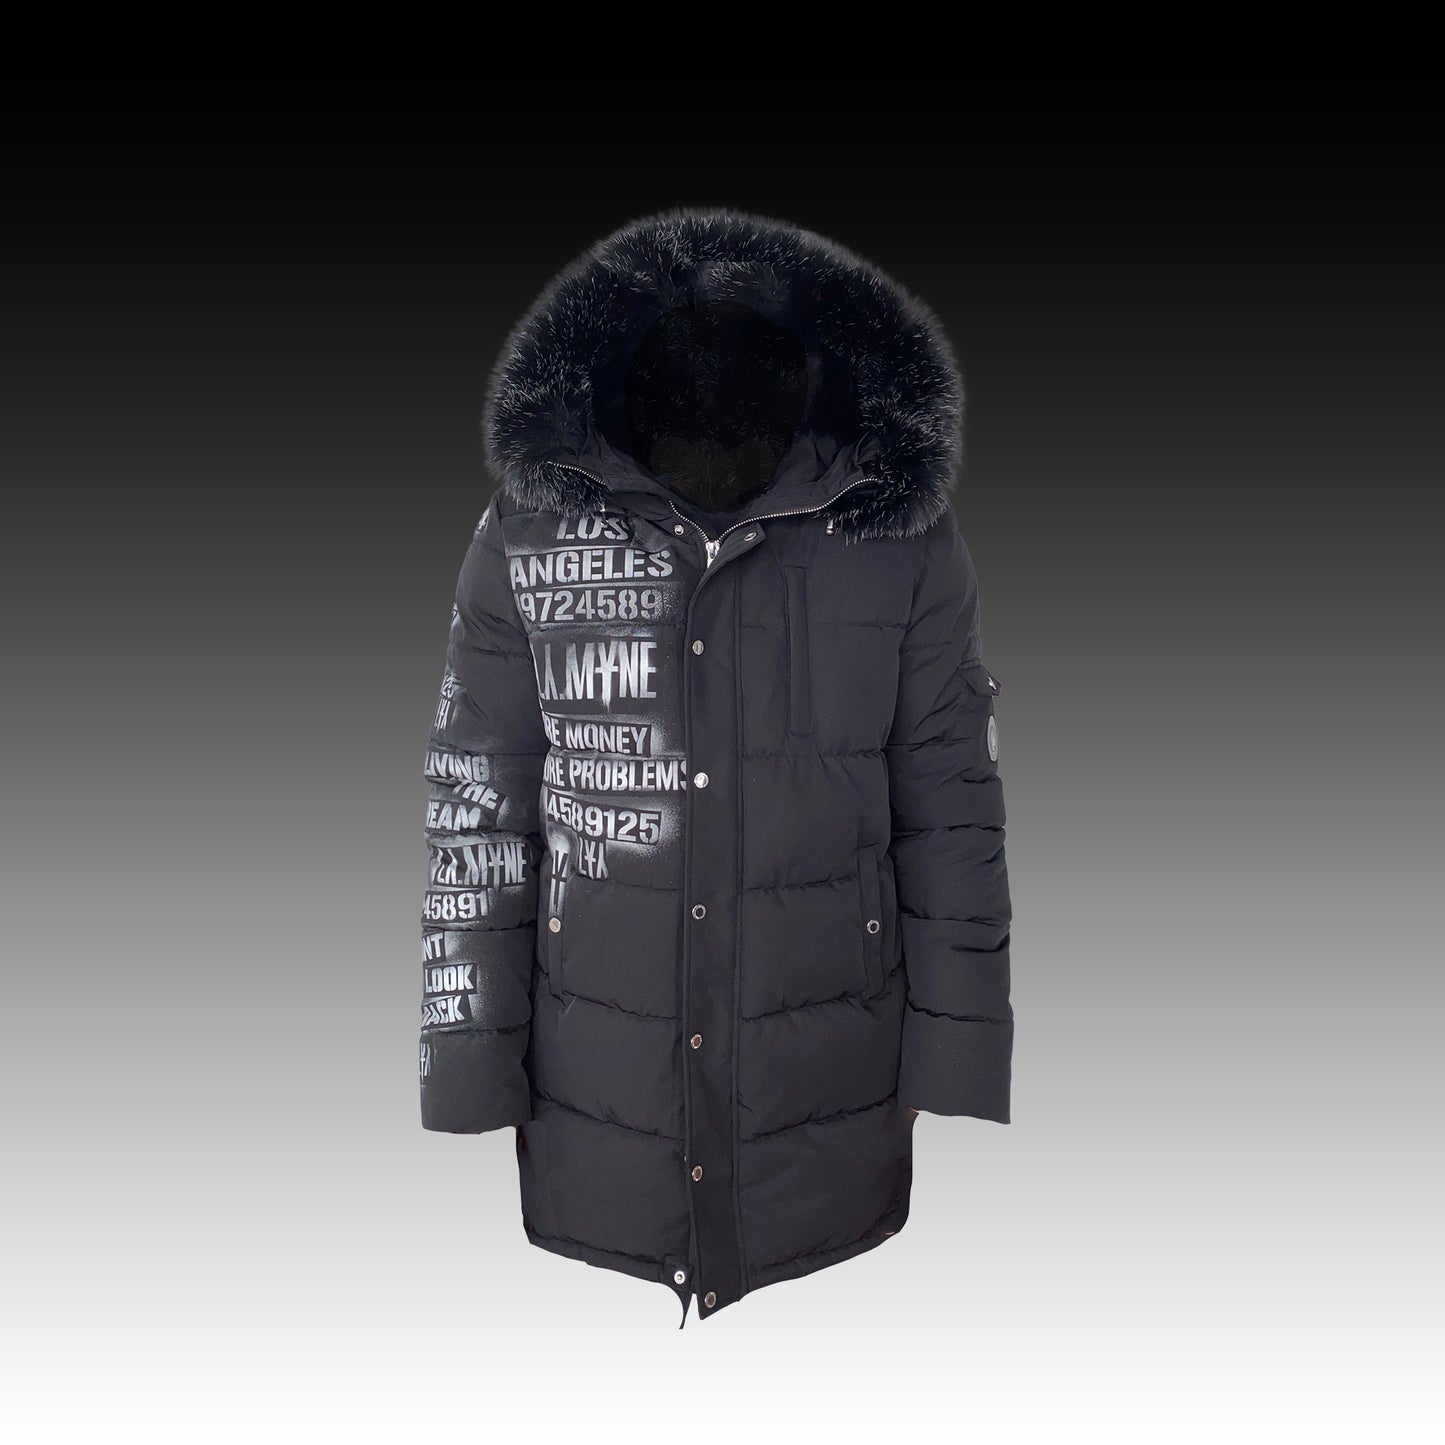 One of one - winter jacket